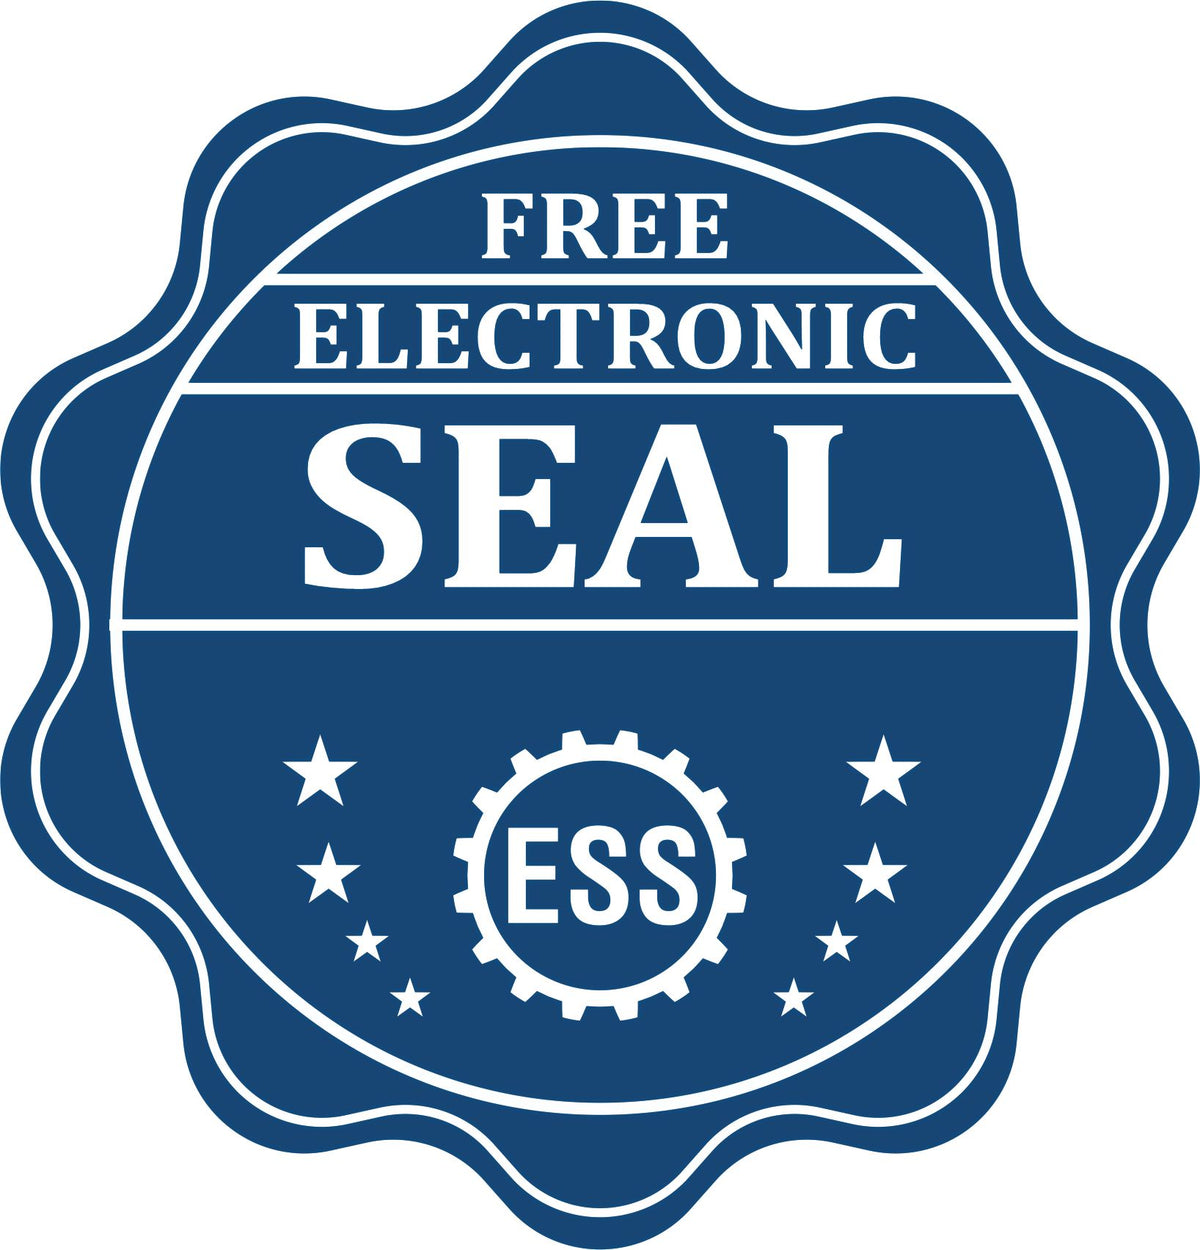 A badge showing a free electronic seal for the Handheld Louisiana Land Surveyor Seal with stars and the ESS gear on the emblem.